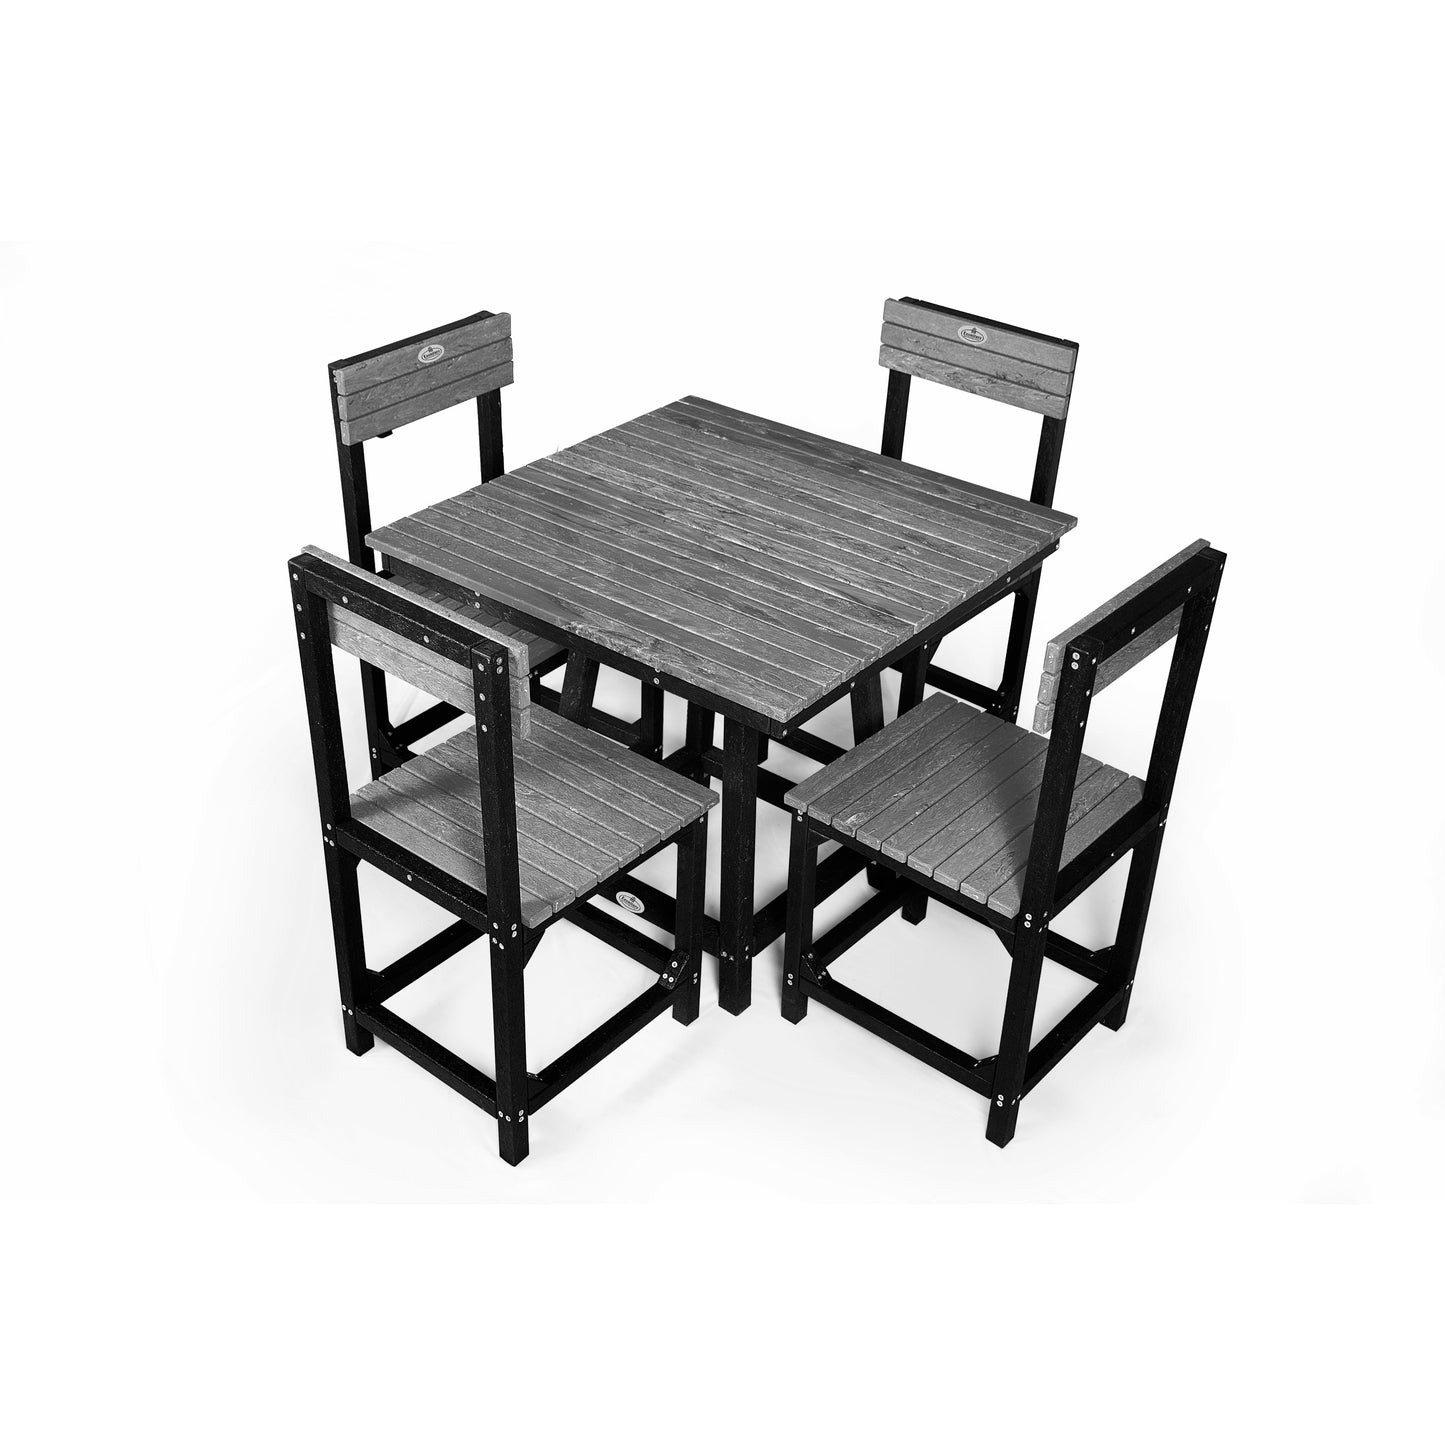 Eco Dining Chair Set 4 seater without armrest